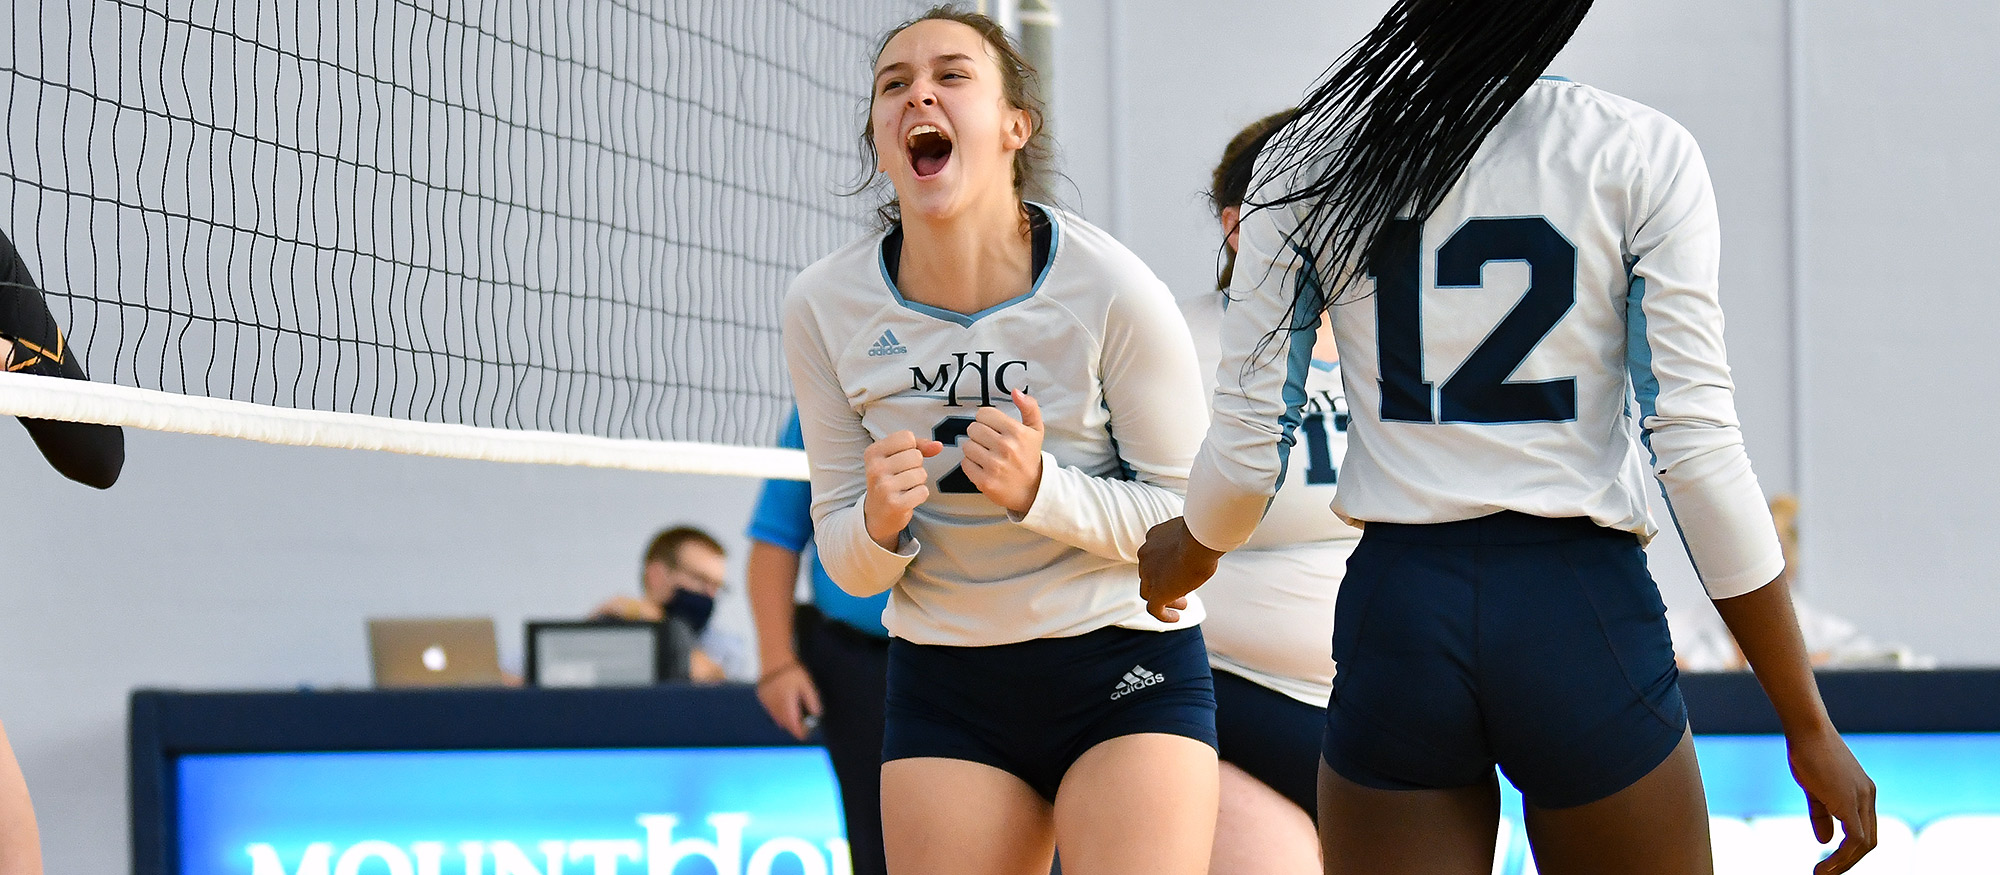 McKenna Crosby had five kills in Mount Holyoke's 3-0 win at Dean on Sept. 15, 2022. (RJB Sports file photo)